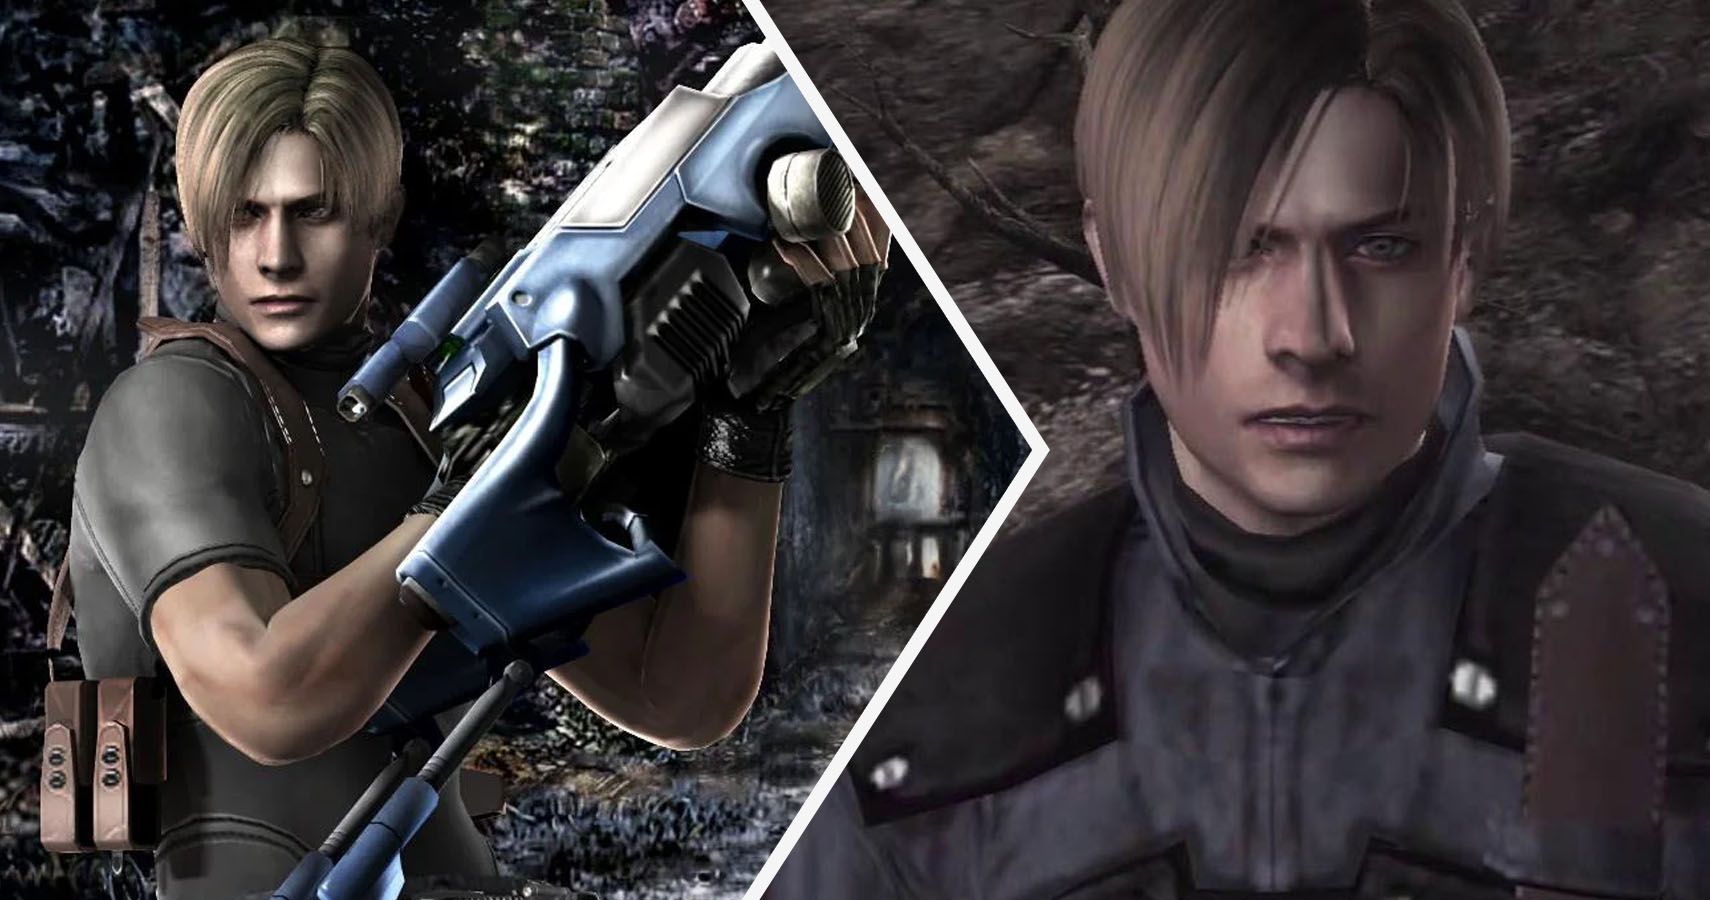 Preview — Resident Evil 4: Separate Ways finishes the story with